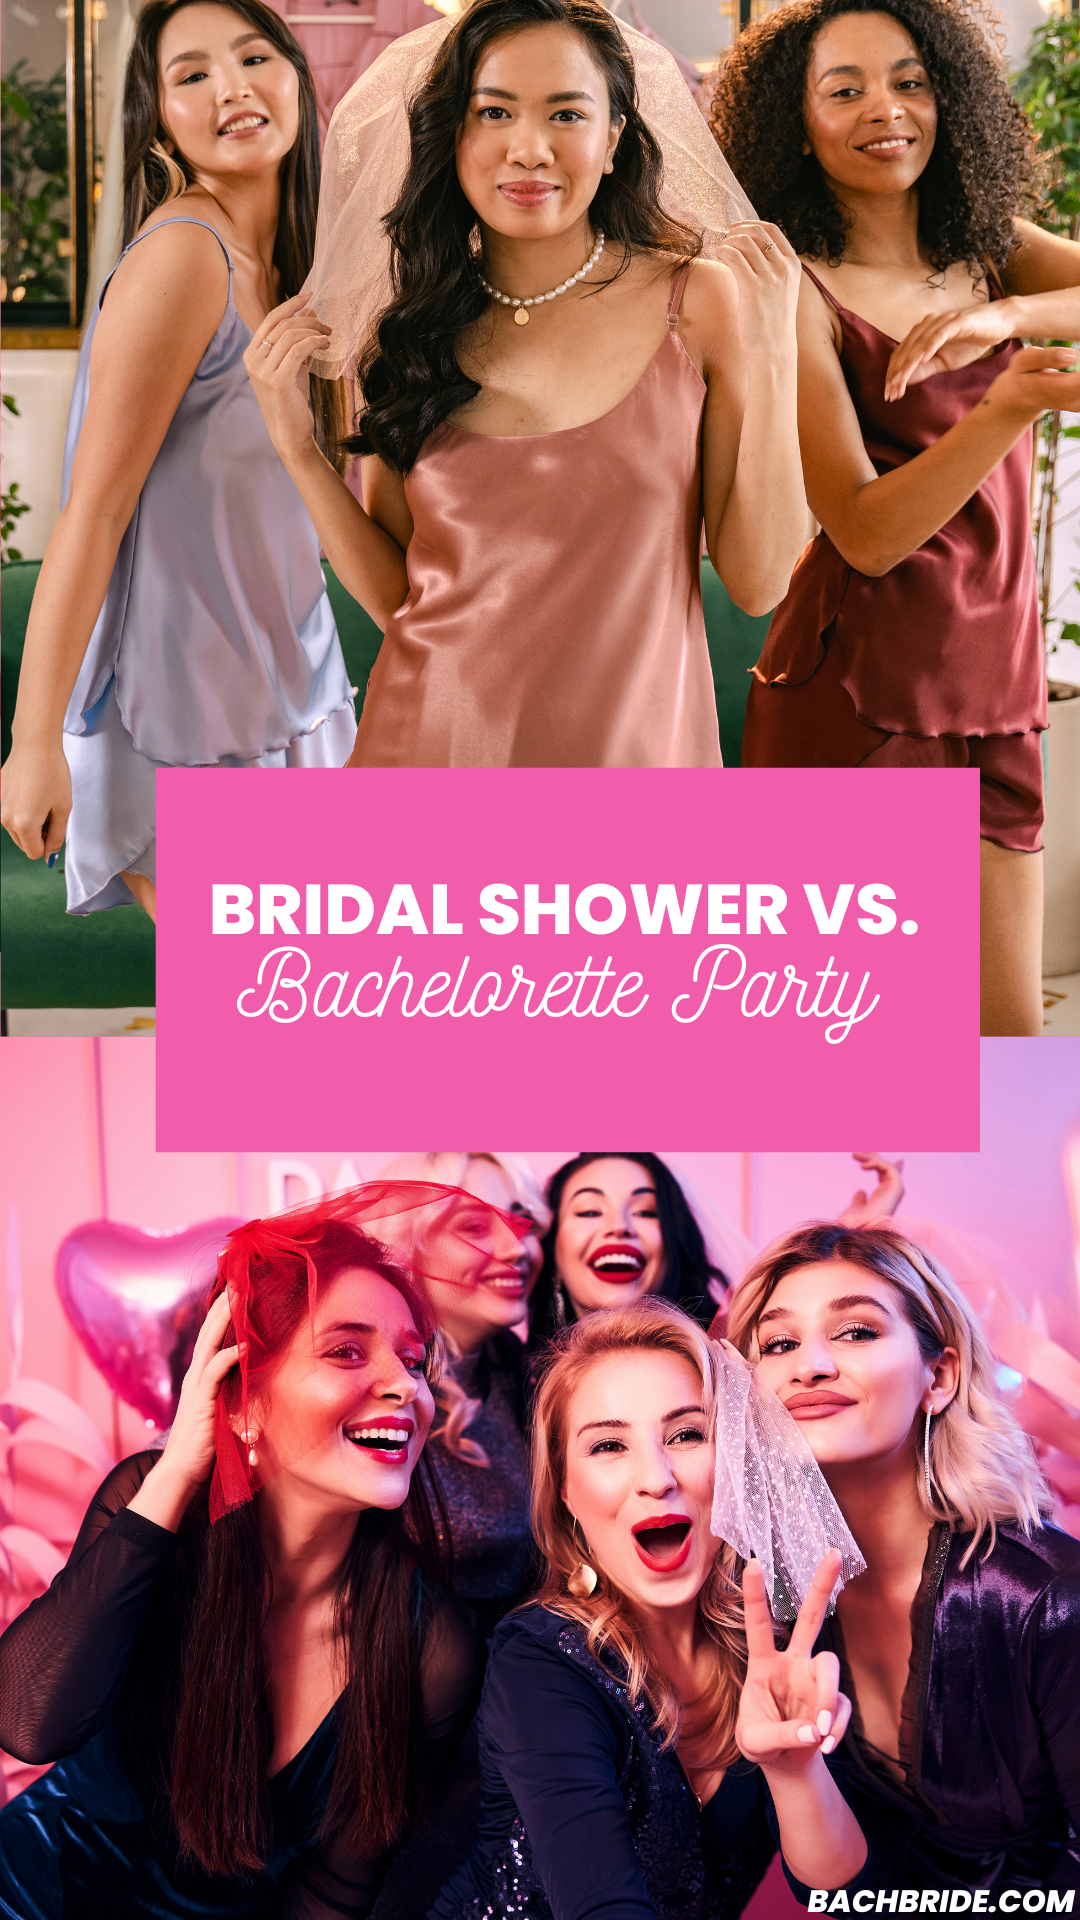 Bridal Shower vs Bachelorette Party: What's the Difference? - Bach Bride